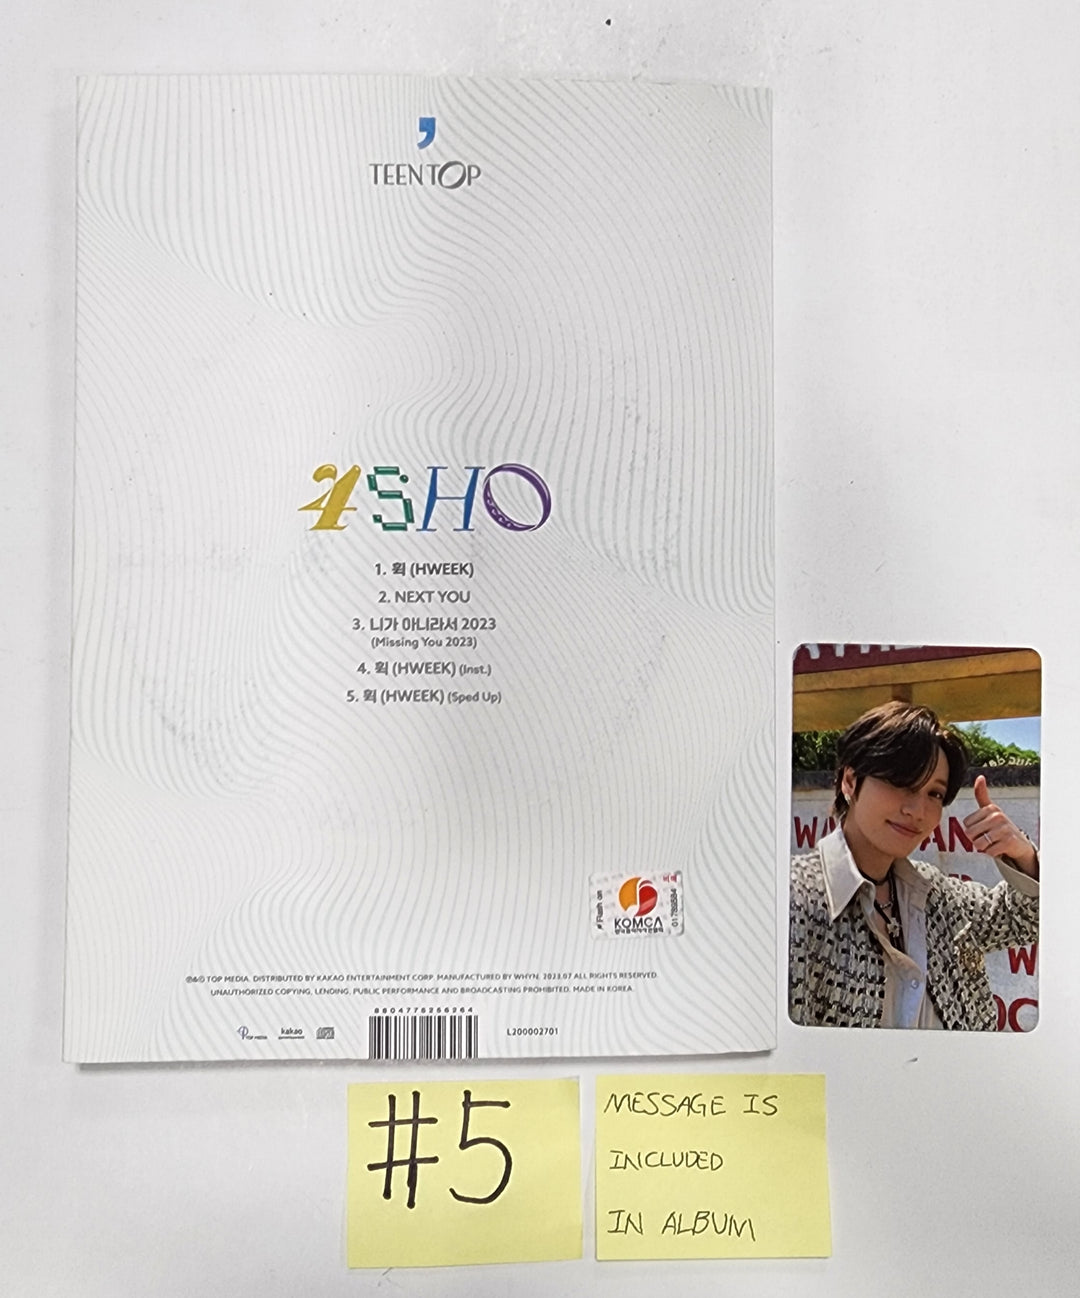 TEEN TOP "4SHO" - Hand Autographed(Signed) Promo Album